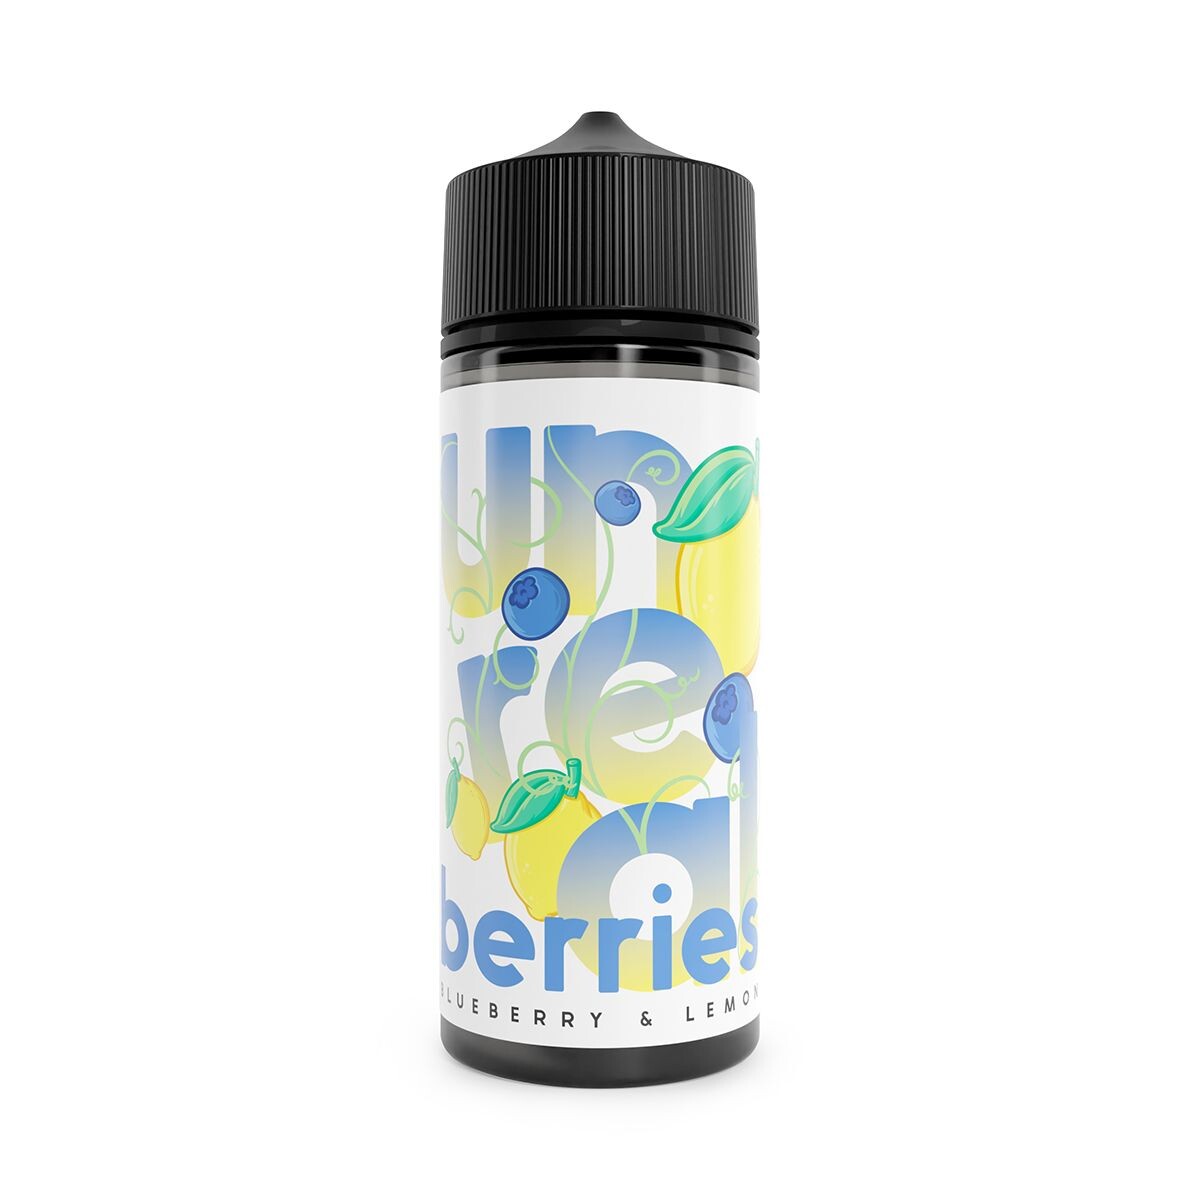 blueberry and lemon flavour 100ml e-liquid by unreal berries